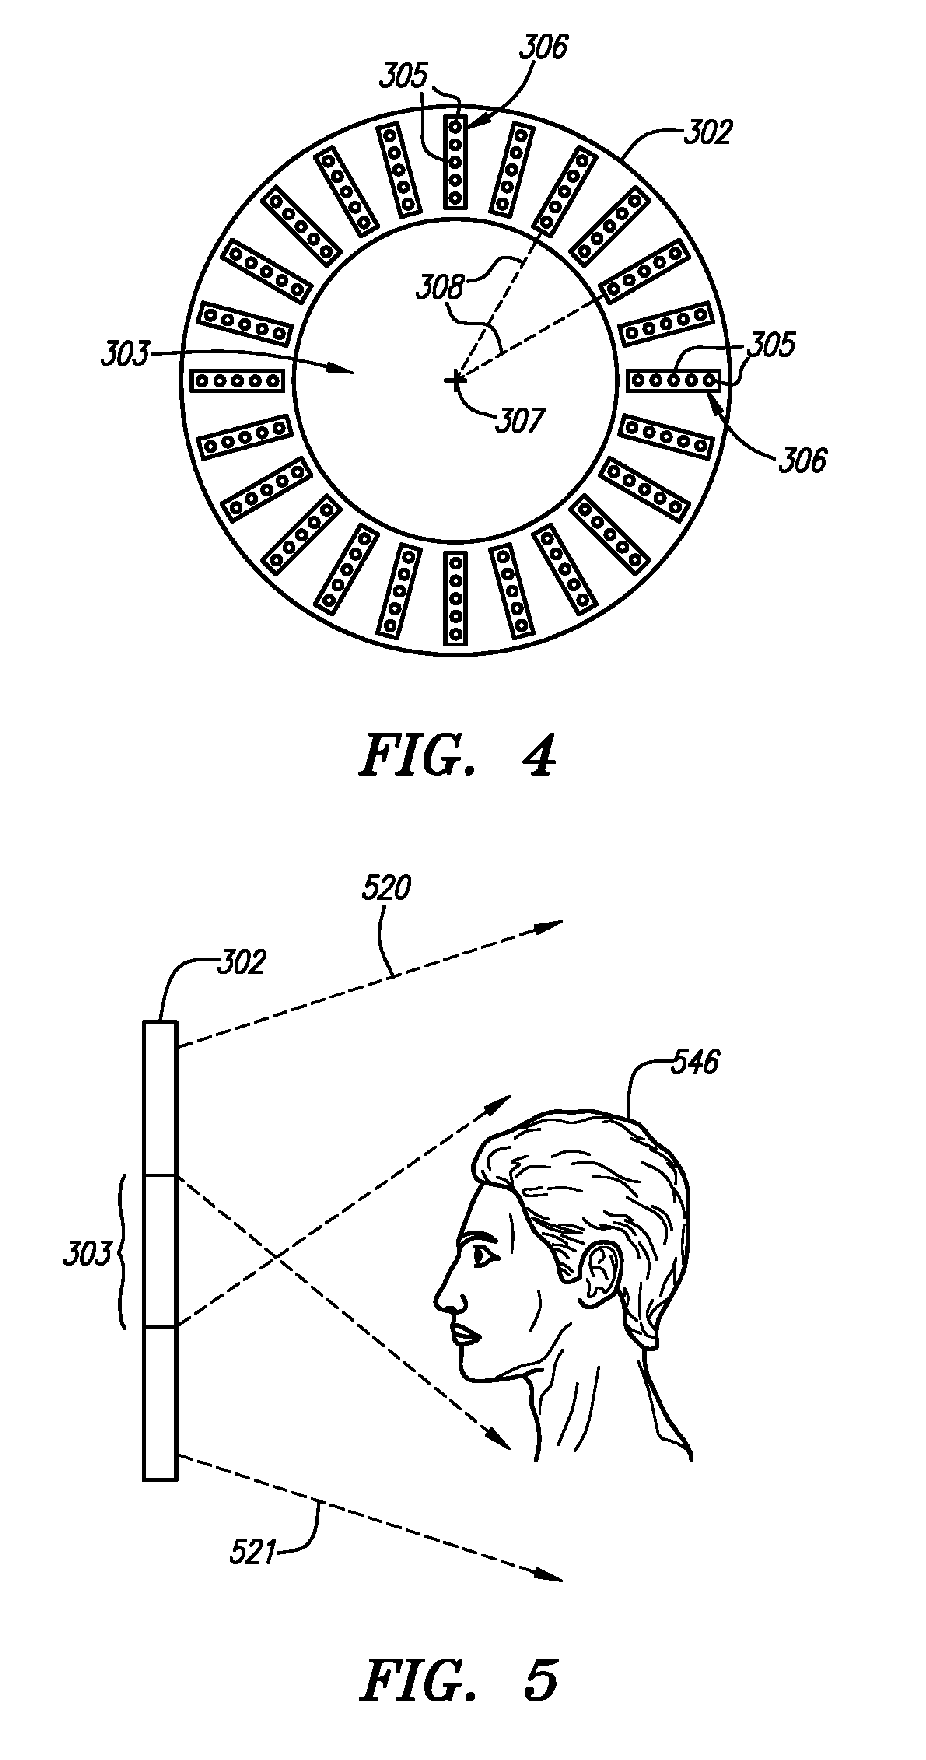 Wide area lighting apparatus and effects system